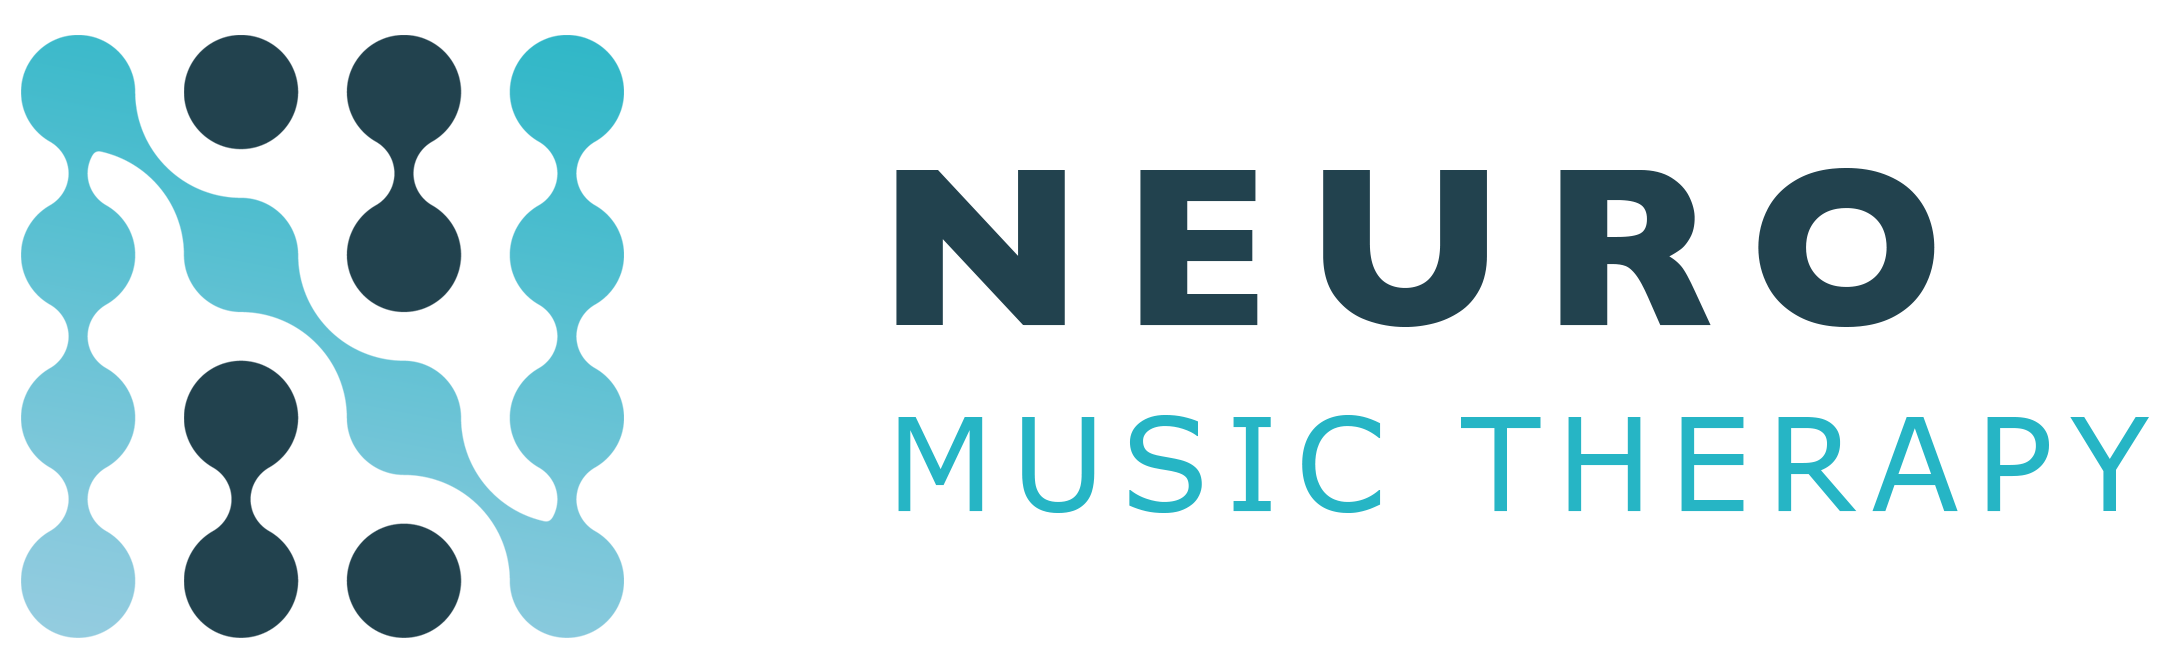 Neuro Music Therapy